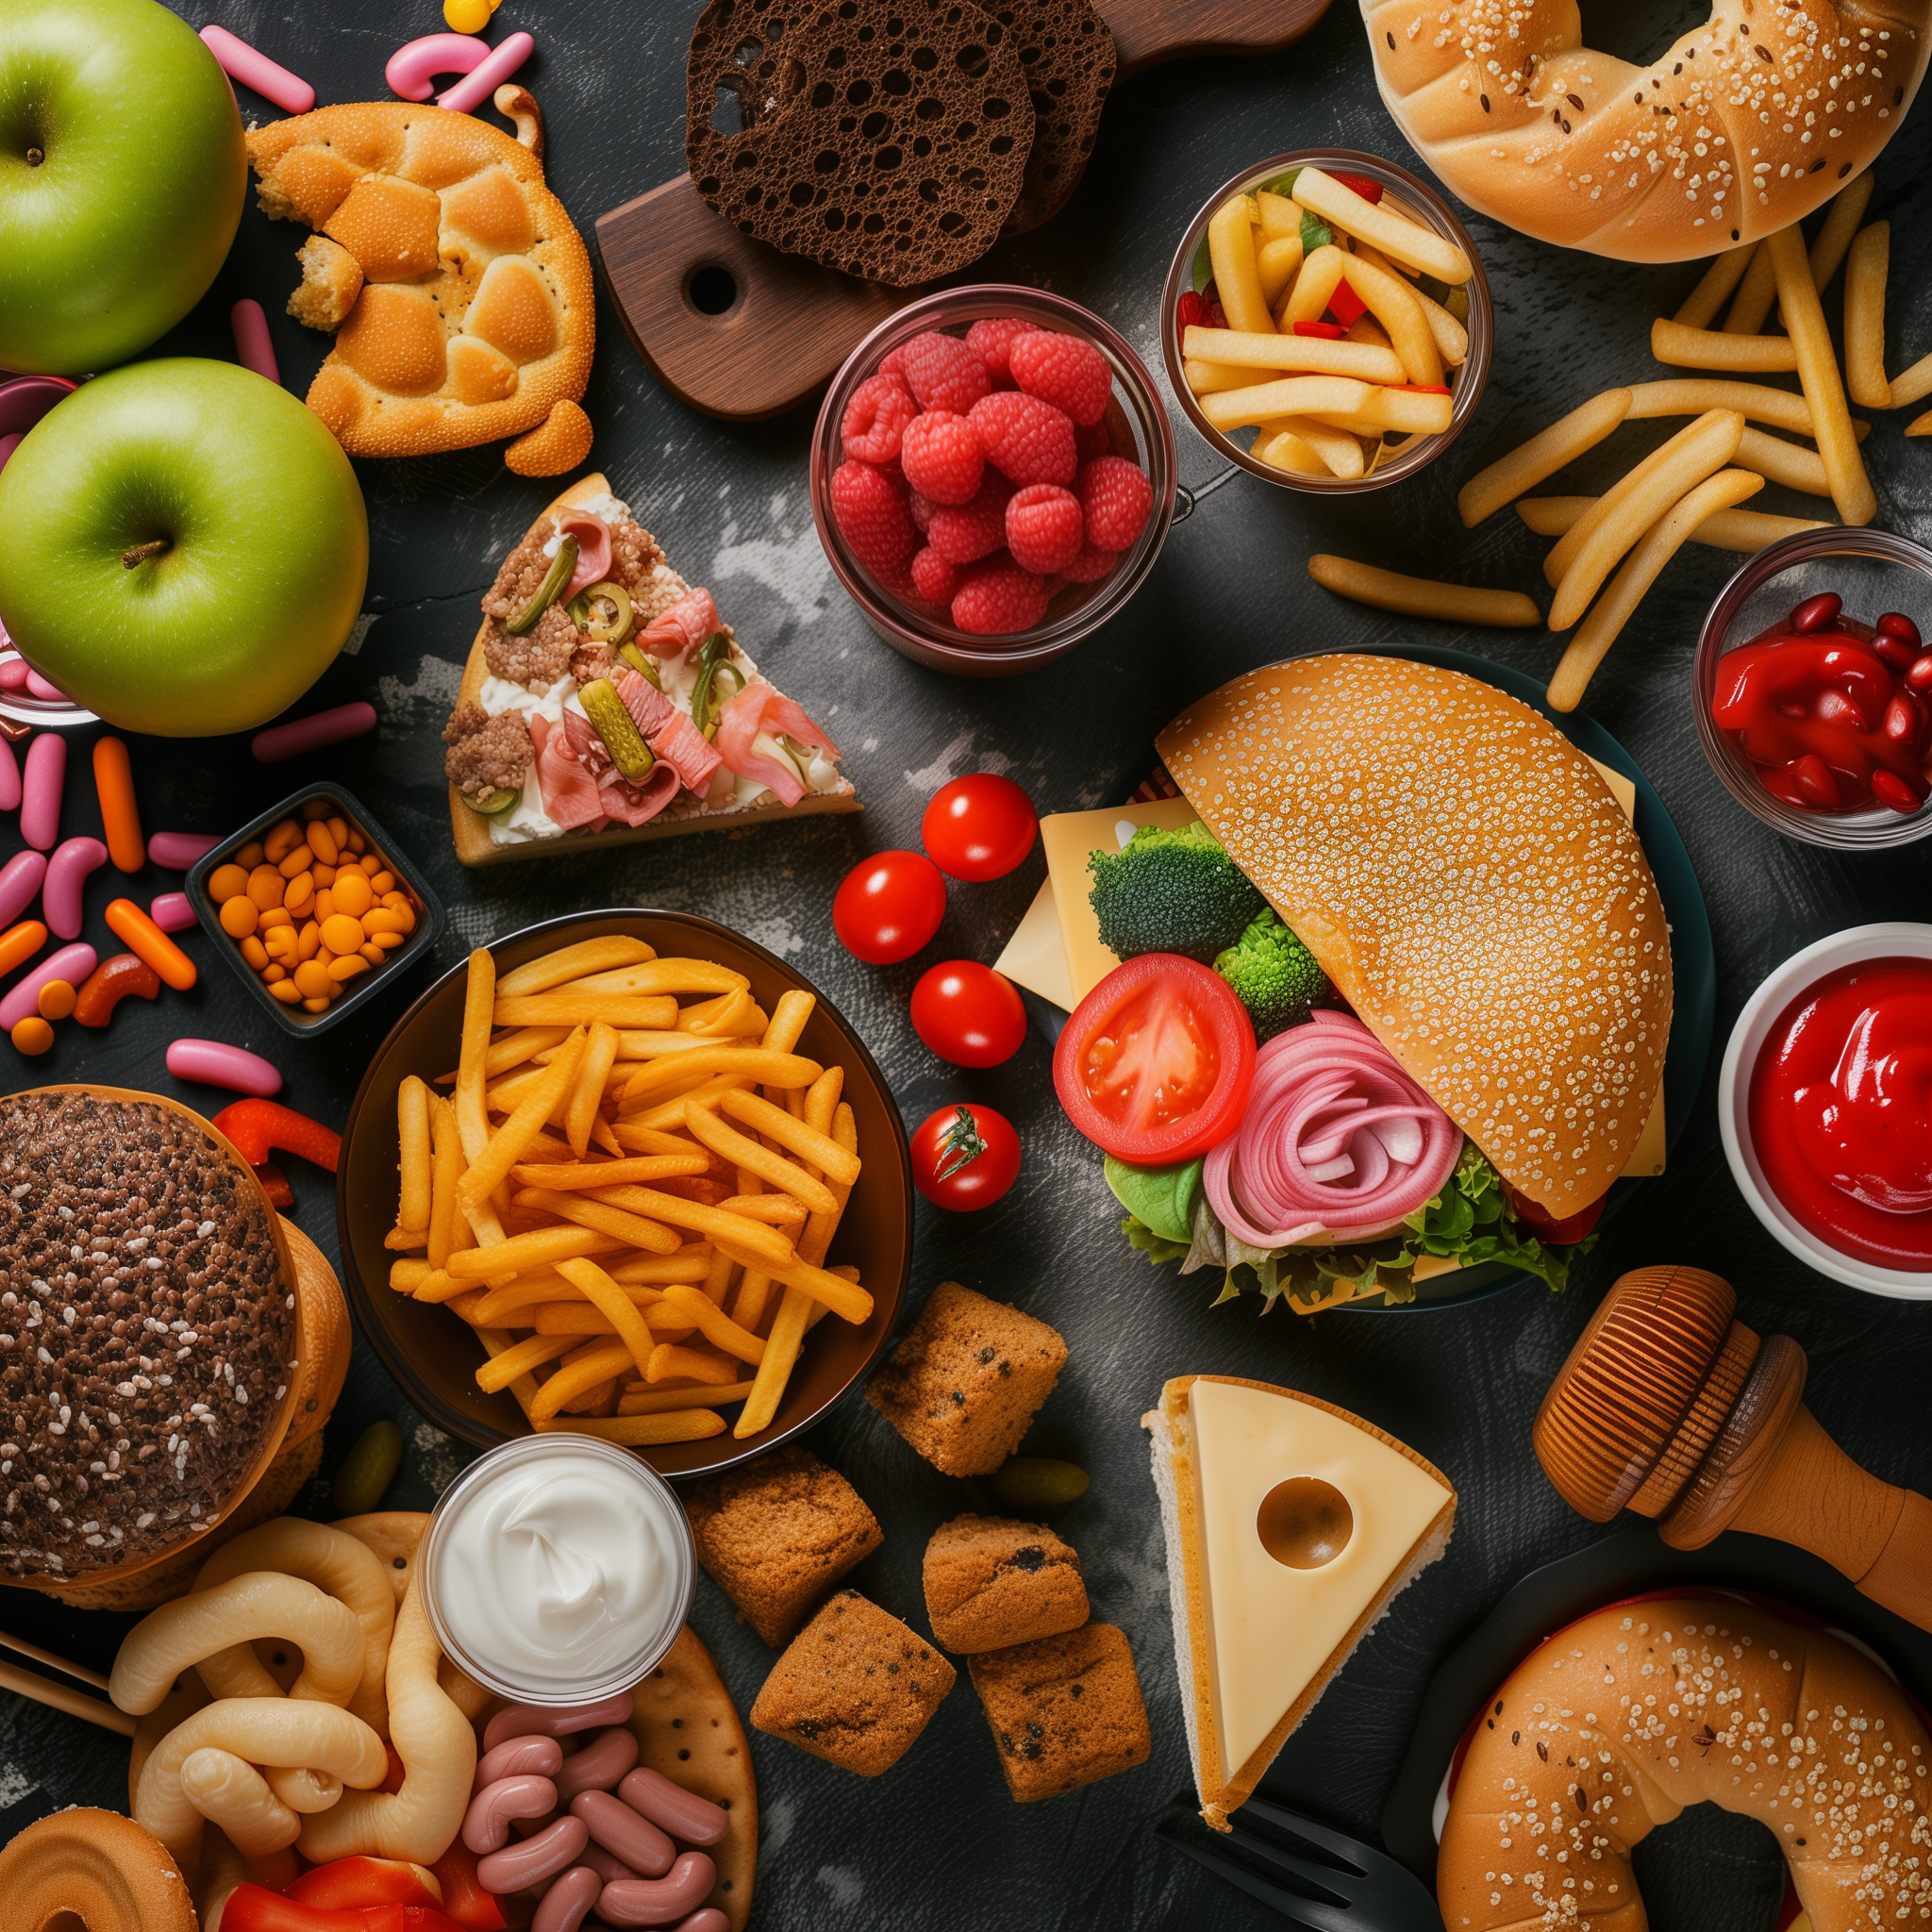 A tantalizing top view of a variety of indulgent foods spread out, suggestive of a 'cheat day' during intermittent fasting. The assortment includes a cheeseburger with a sesame bun, fries, assorted pastries and candies, a slice of cheesecake, fresh fruits like apples and raspberries, and condiments such as ketchup and mayonnaise